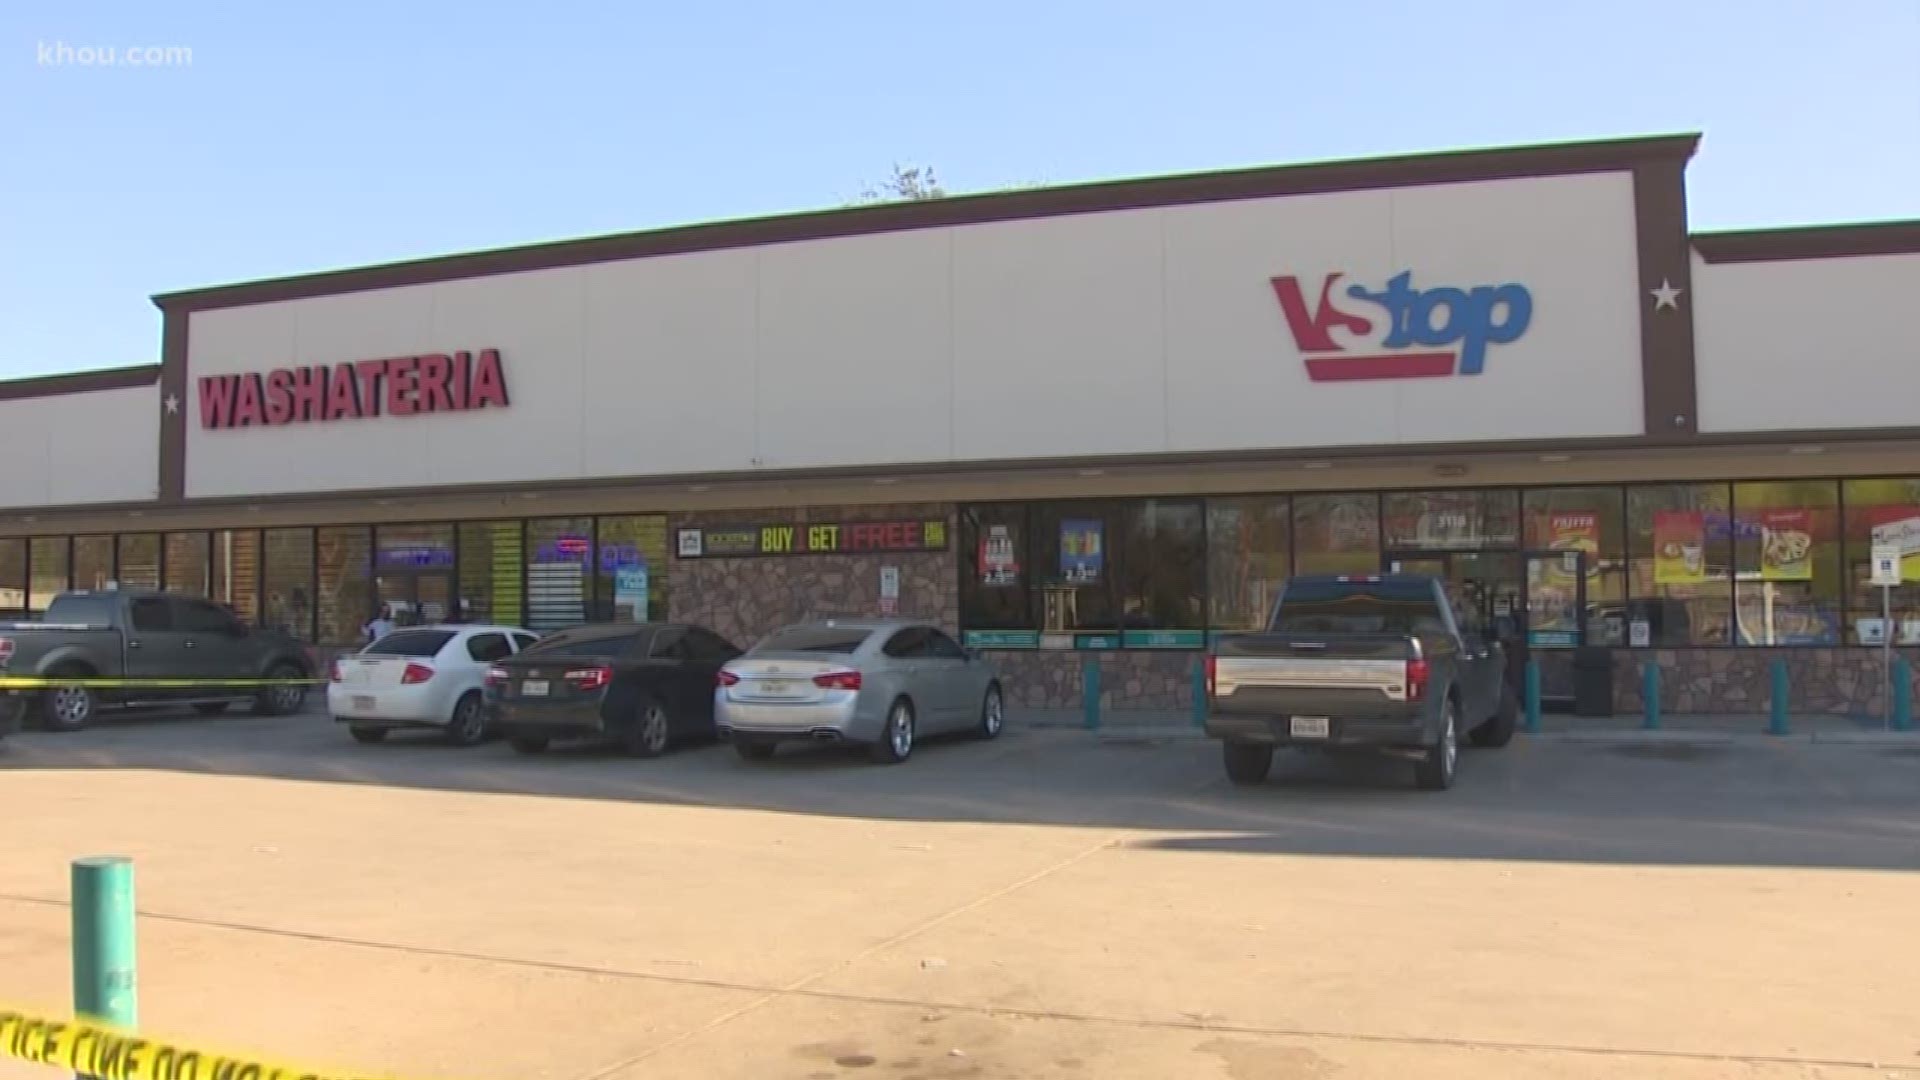 Police said a convenience store manager shot a man who was acting "erratically." The man attempted to rob the store before lunging at the manager, police said.